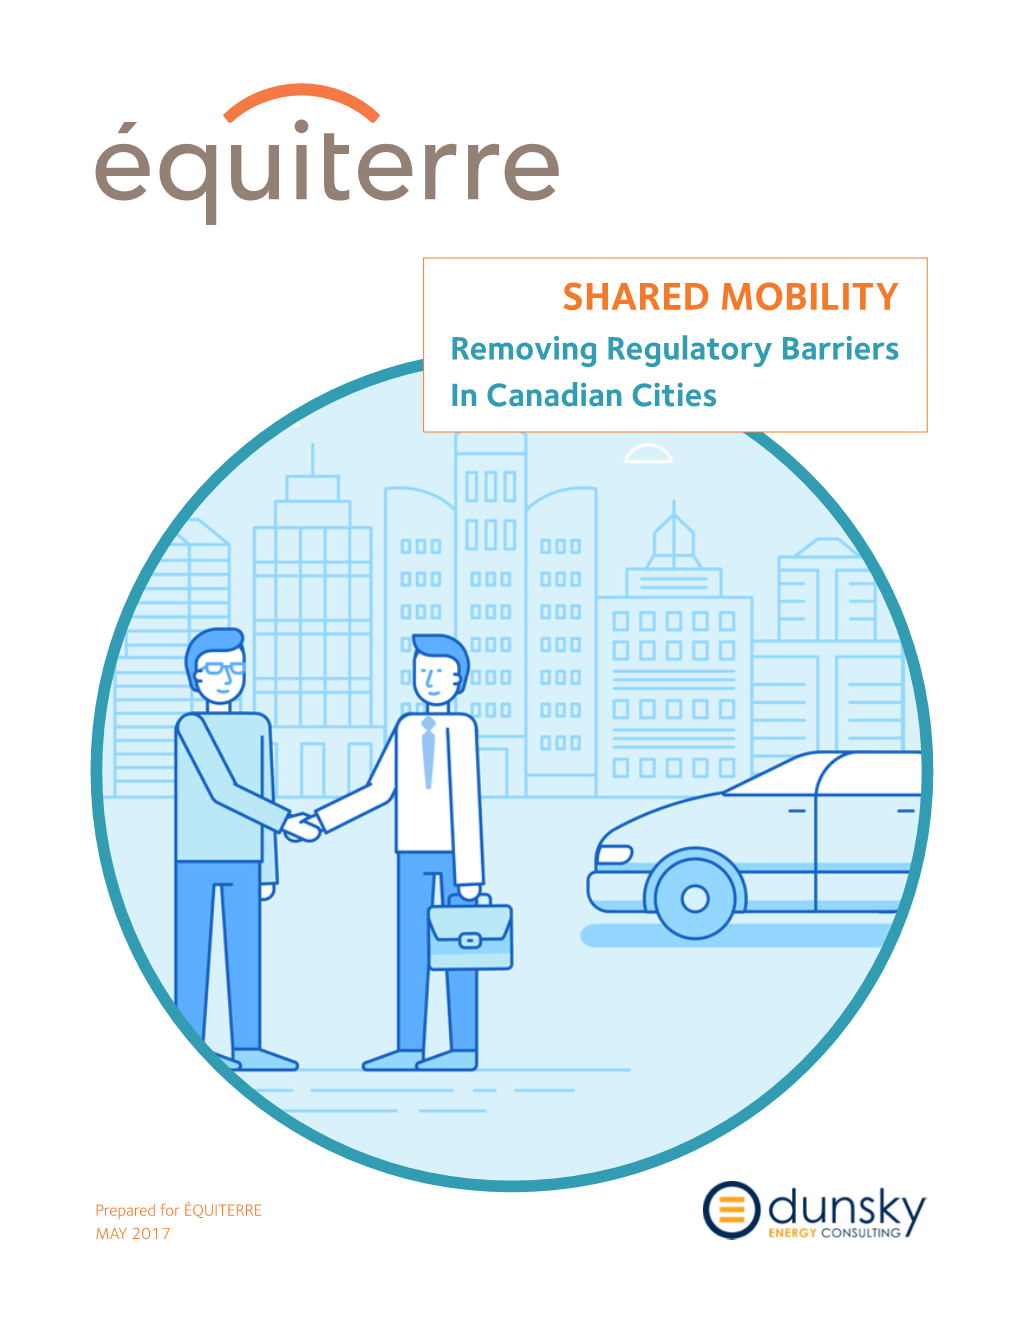 SHARED MOBILITY Removing Regulatory Barriers in Canadian Cities